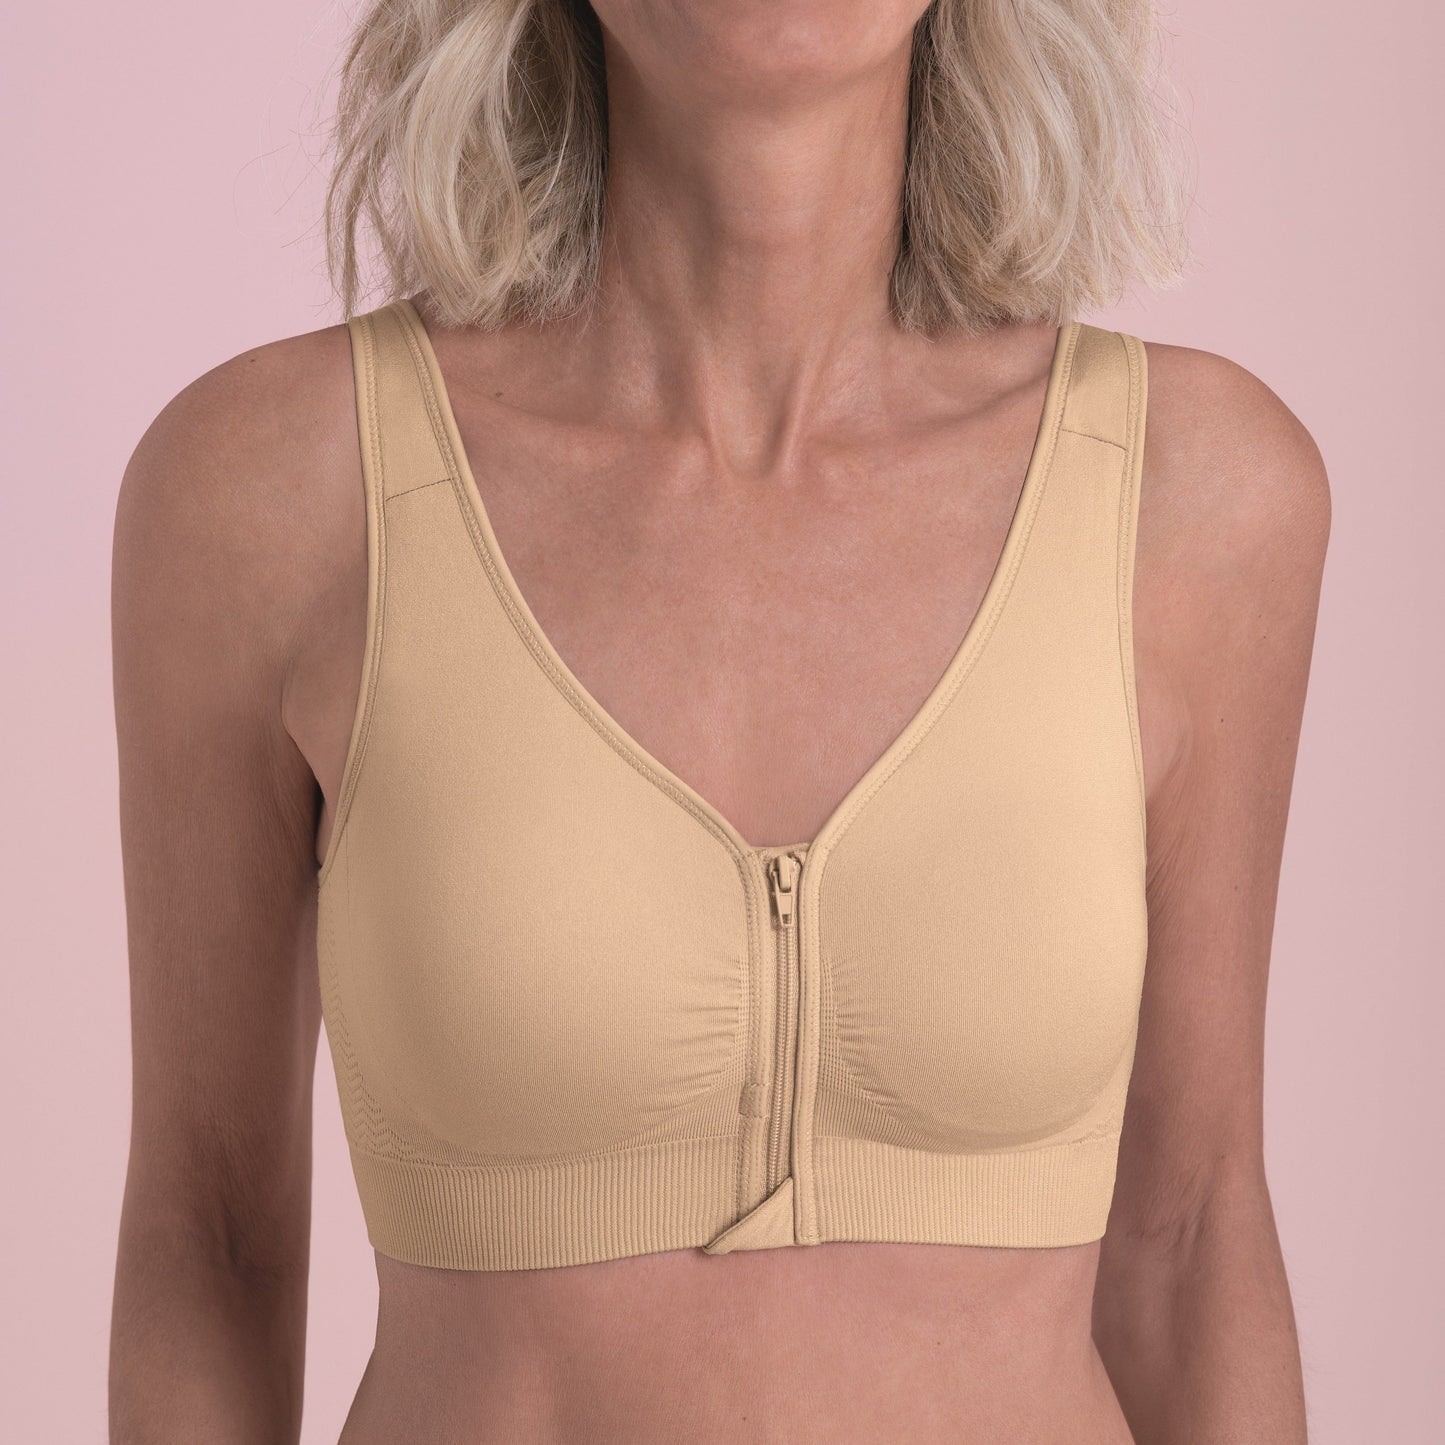 Lynn Front Closure Wireless Bra - Sand worn by model front view